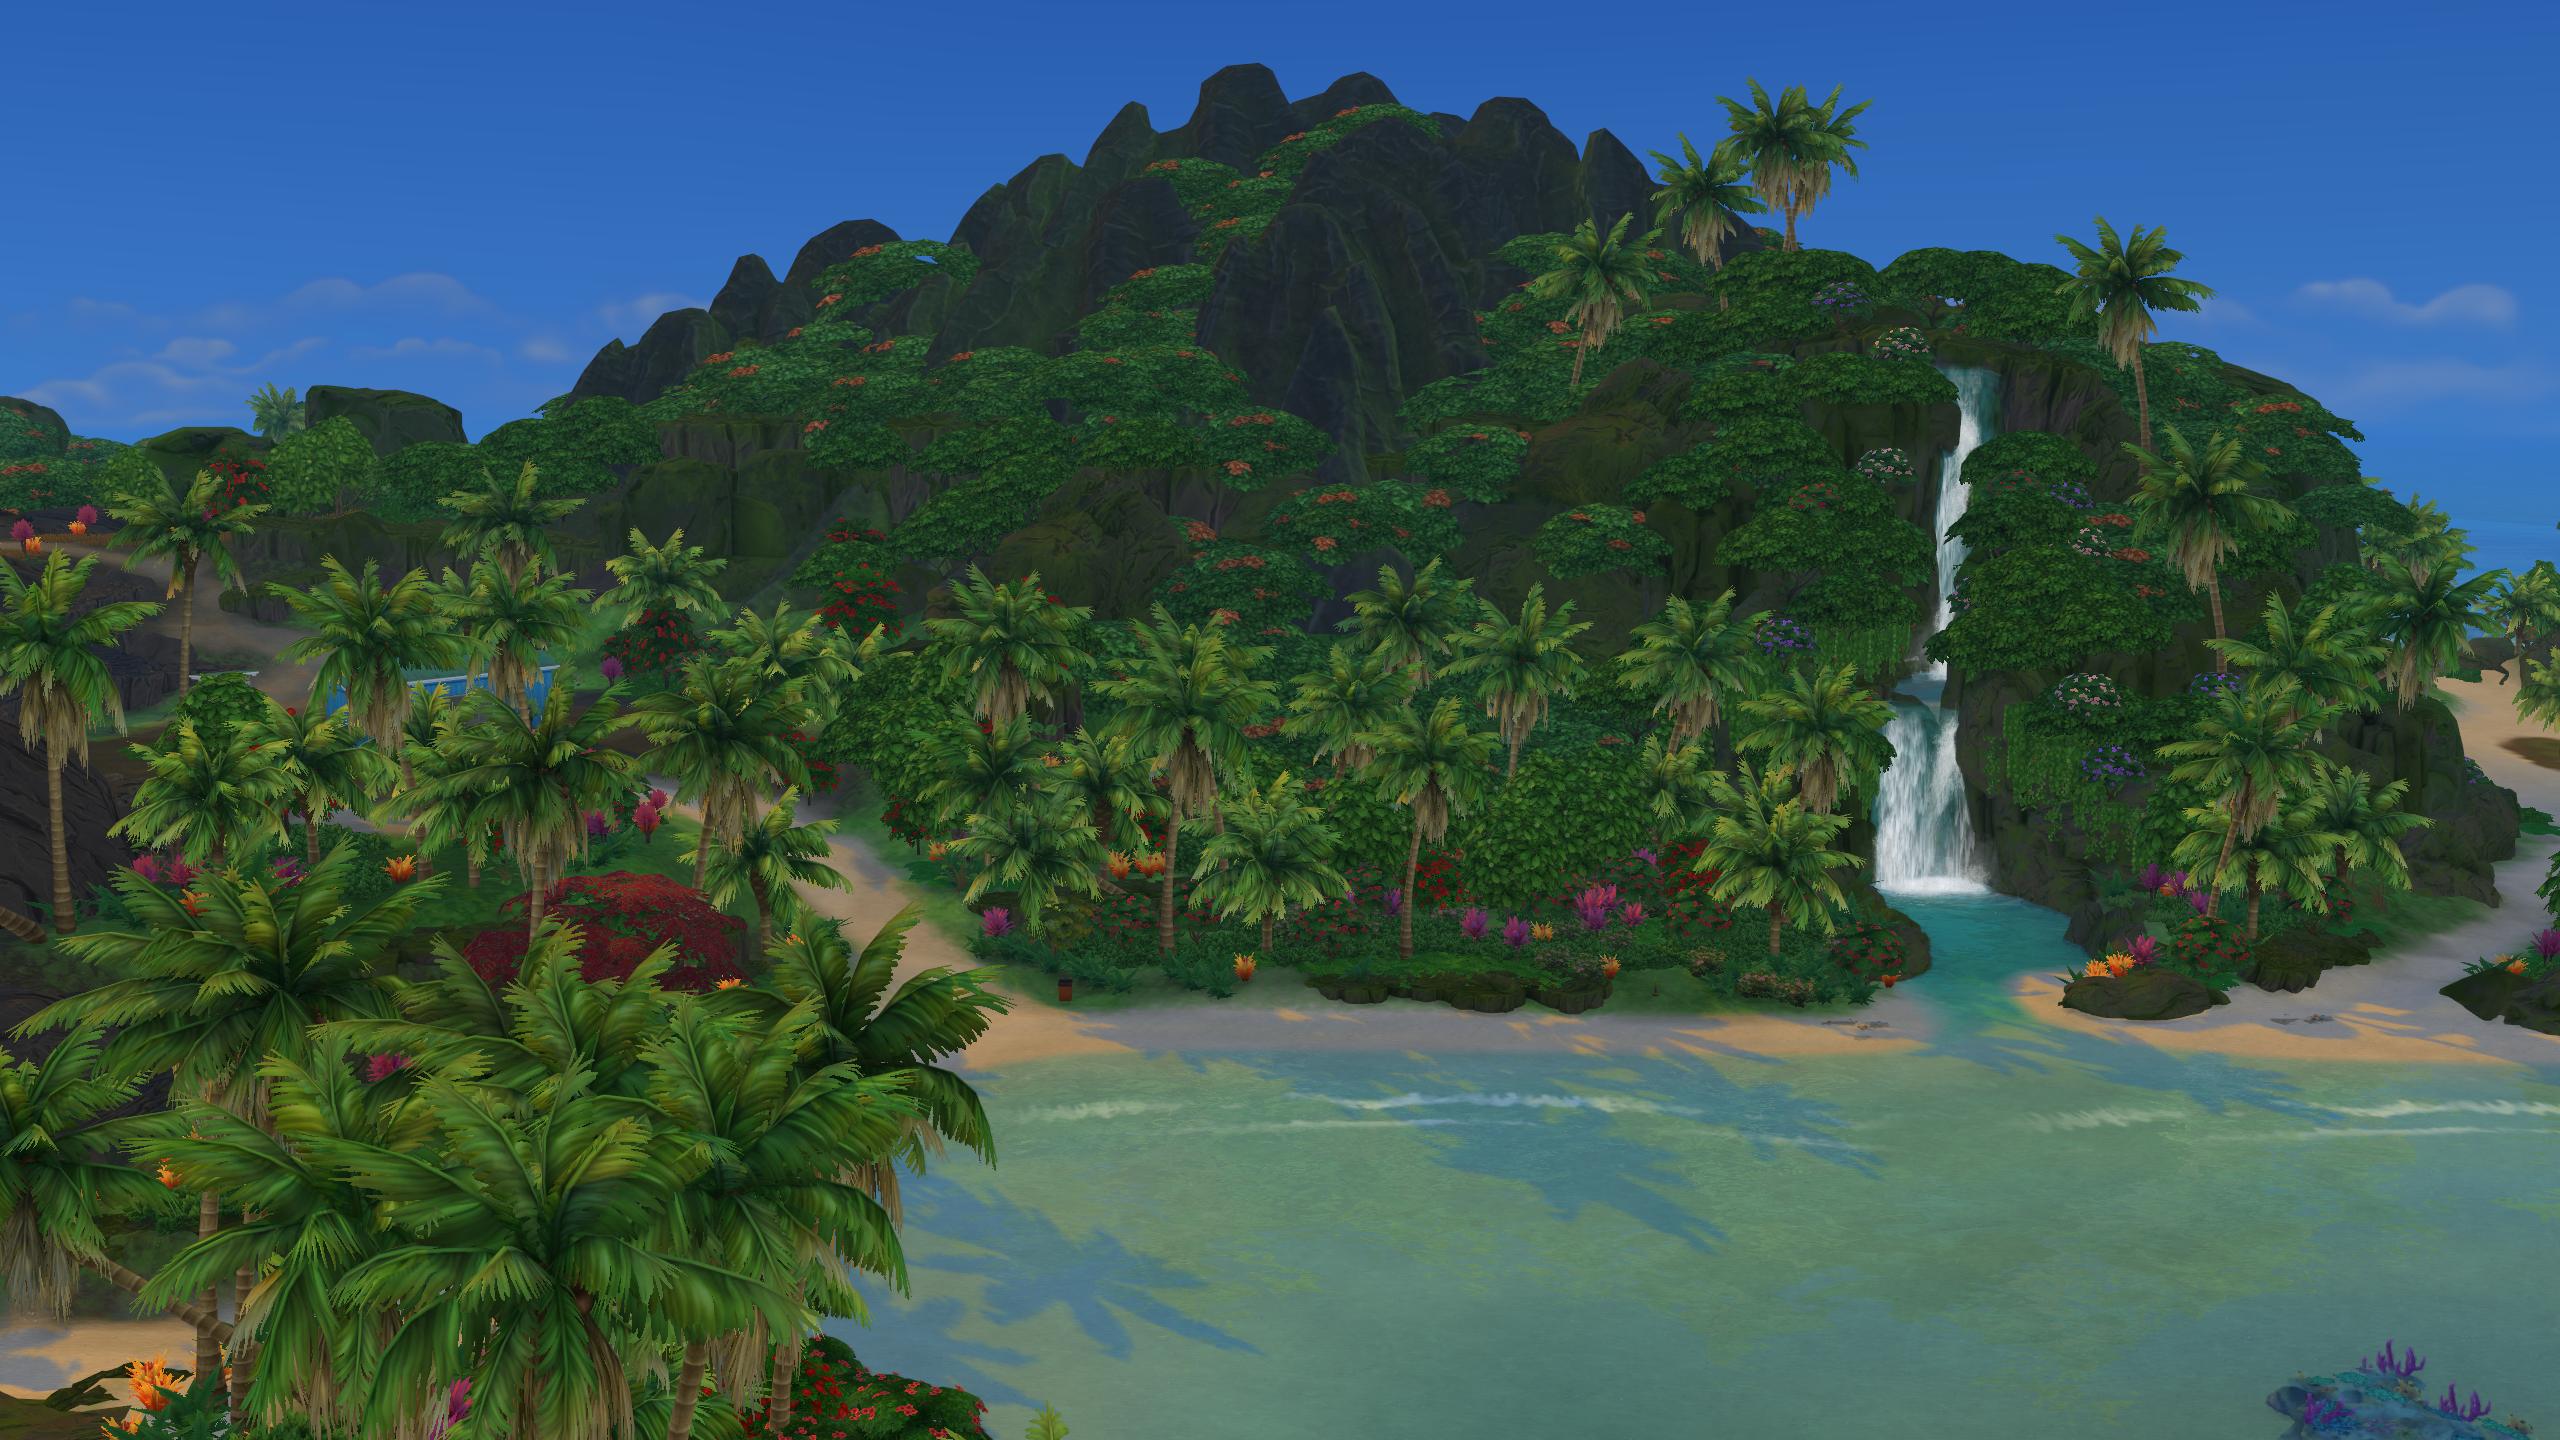 Ecology of one island is changeable in The Sims 4 Island Living